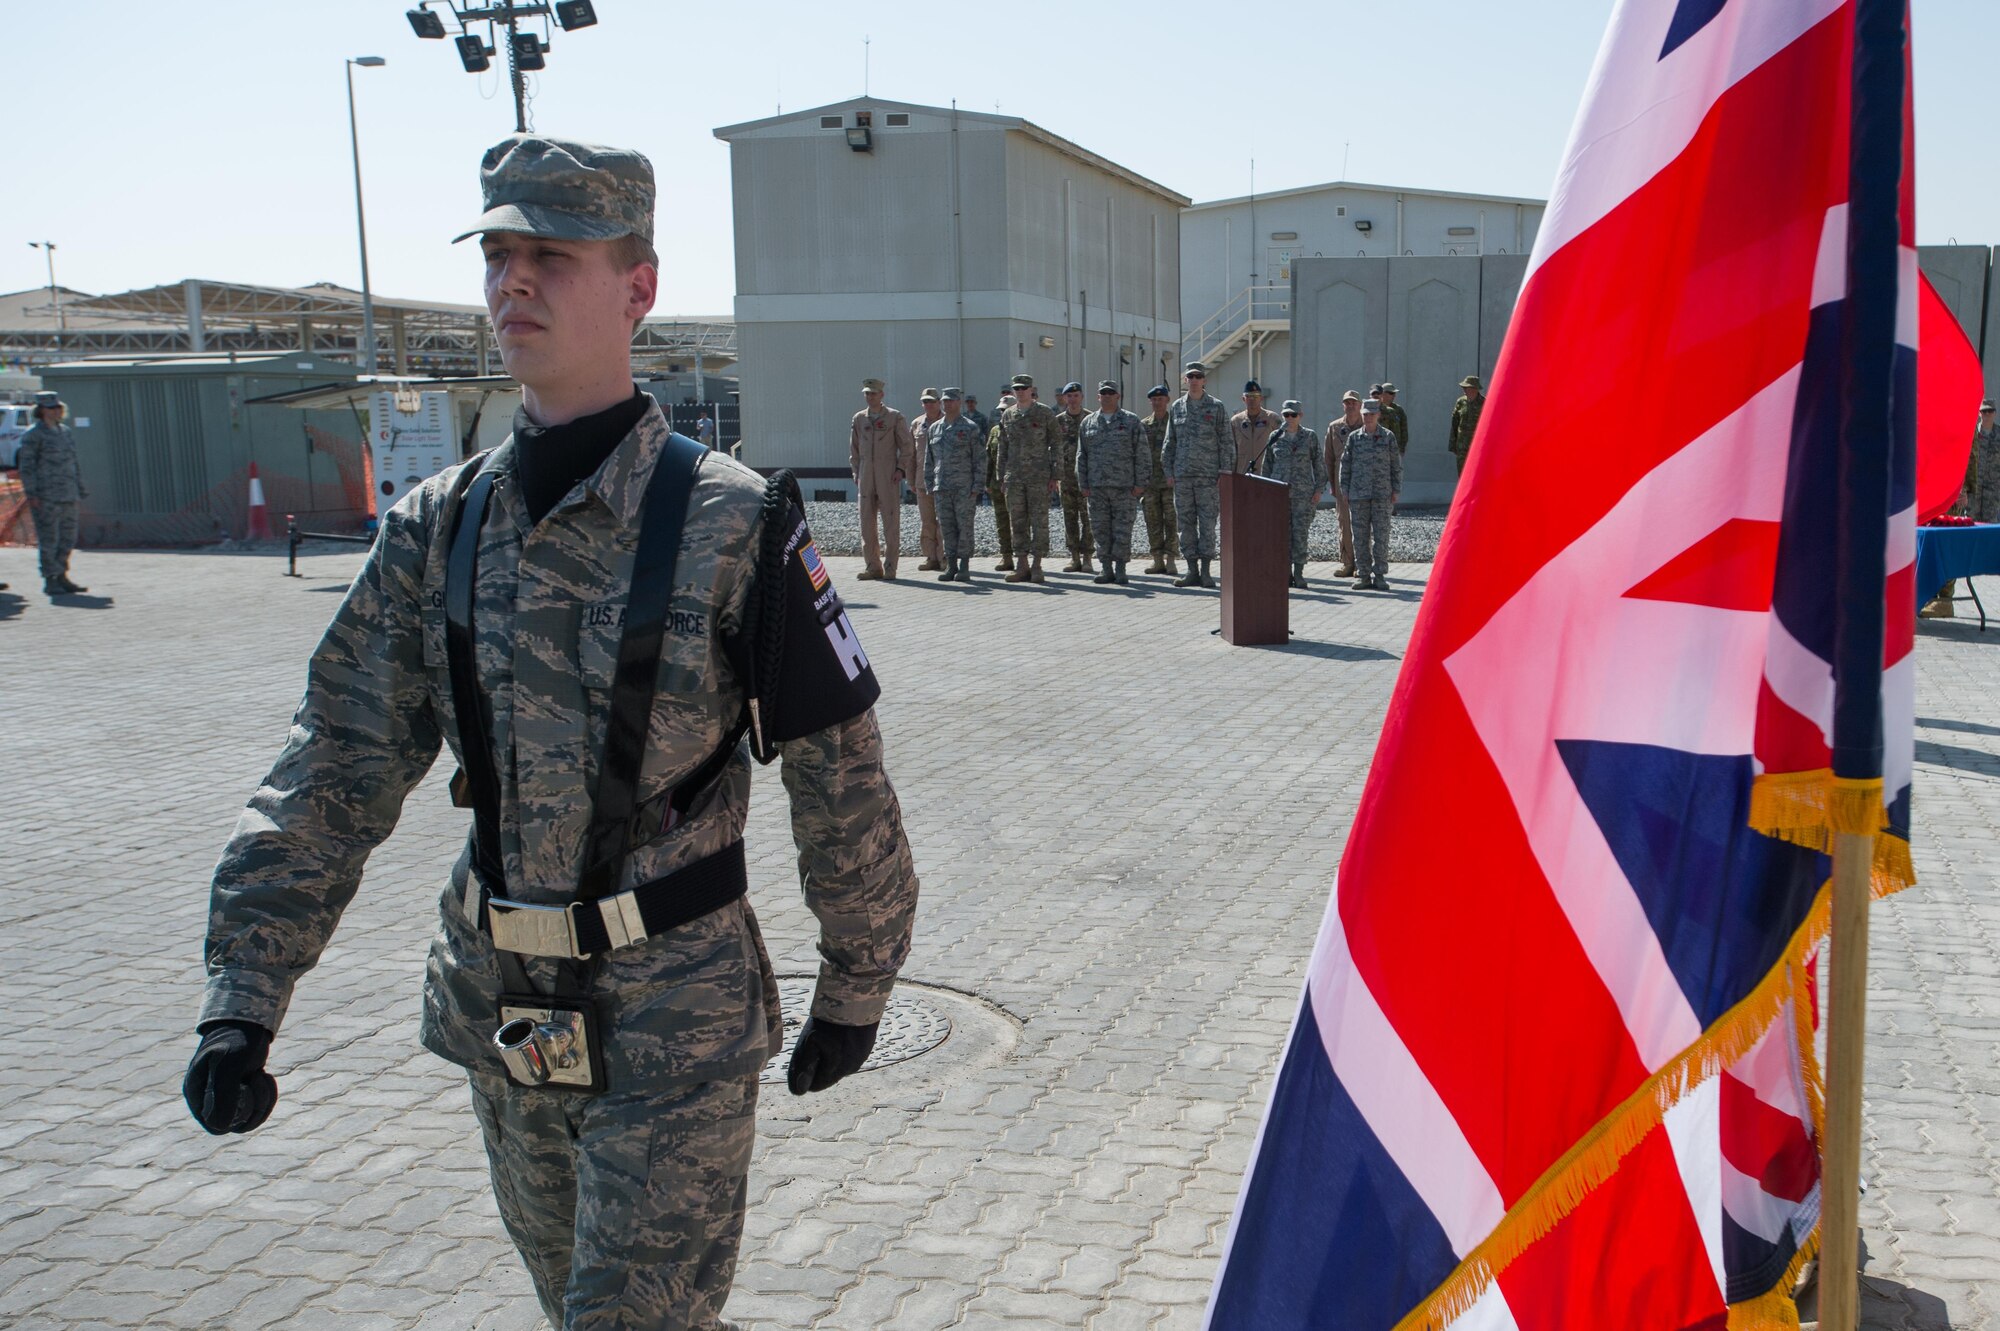 A 380th Air Expeditionary Wing Honor Guard service member marches in formation after placing the U.S. flag at a Coalition Veteran’s Day ceremony on Nov. 11, 2016 at an undisclosed location in Southwest Asia.  The 380 AEW Honor Guard collaborated with service members from the Royal Australian Air Force, the Royal Danish Air Force and the Royal Air Force. (U.S. Air Force photo by Senior Airman Tyler Woodward)